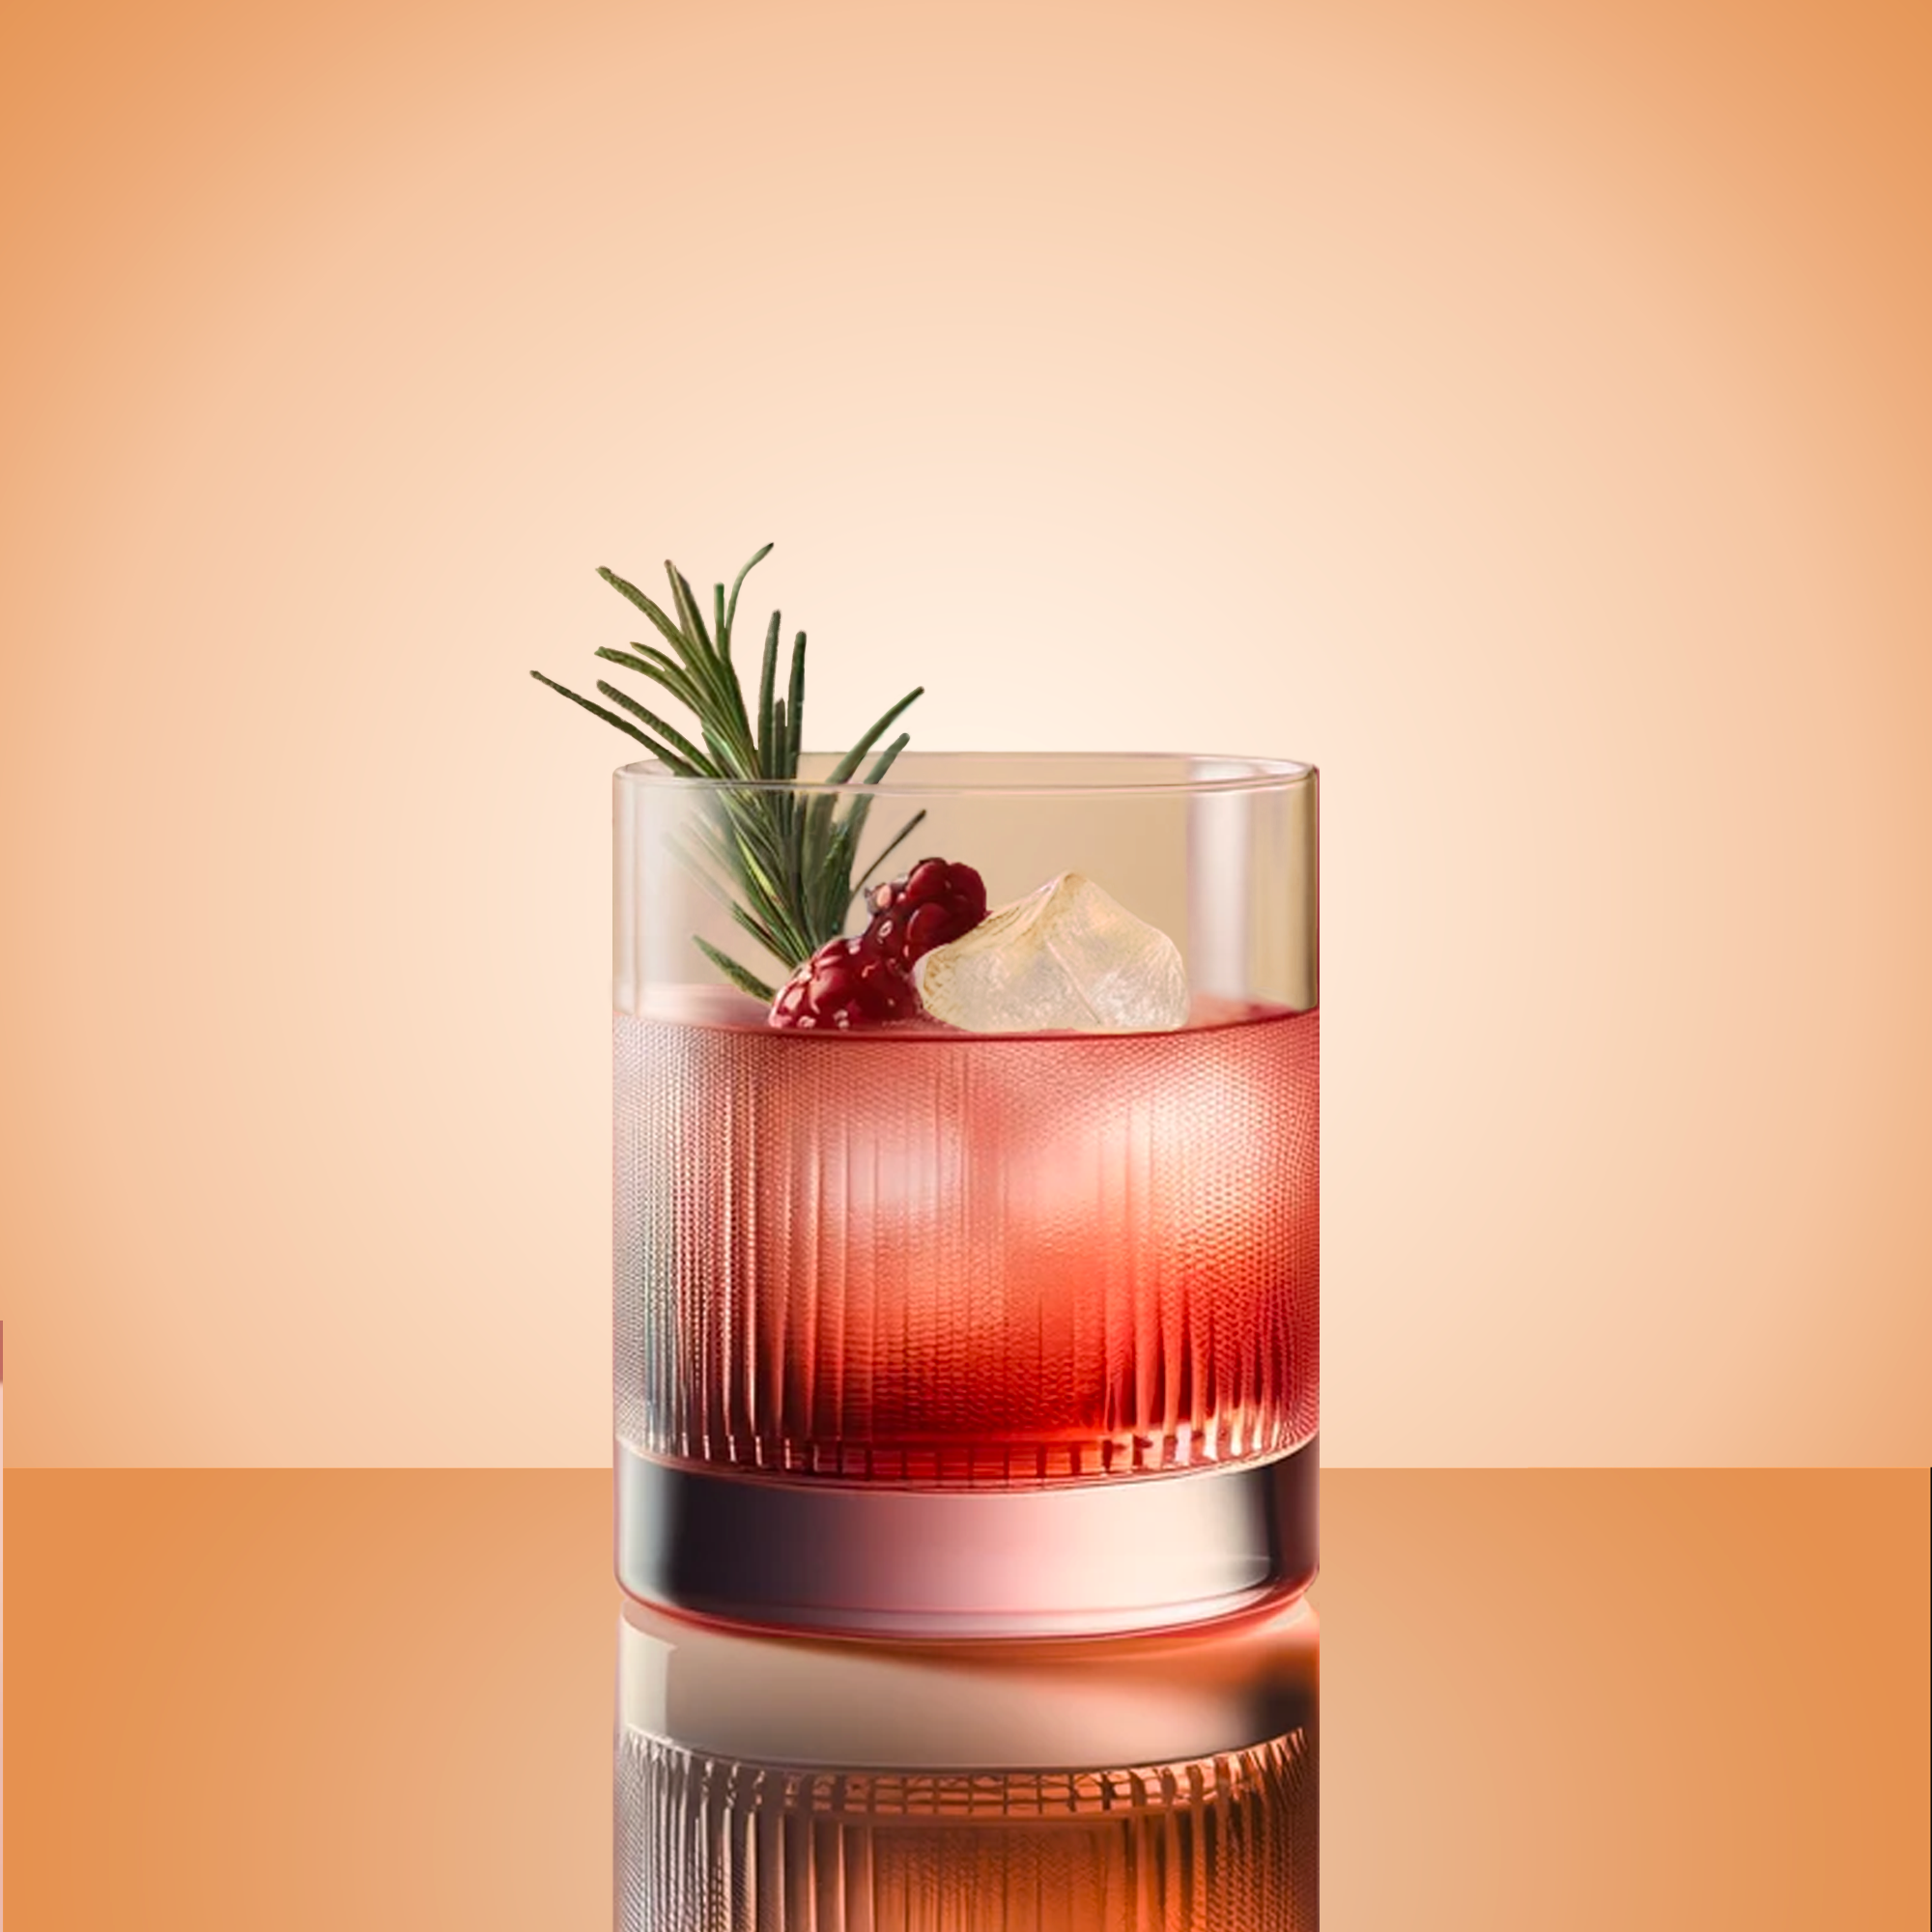 Bramble cocktail in a whisky glass with blackberry and rosemary garnish. Pink beverage and orange gradient background